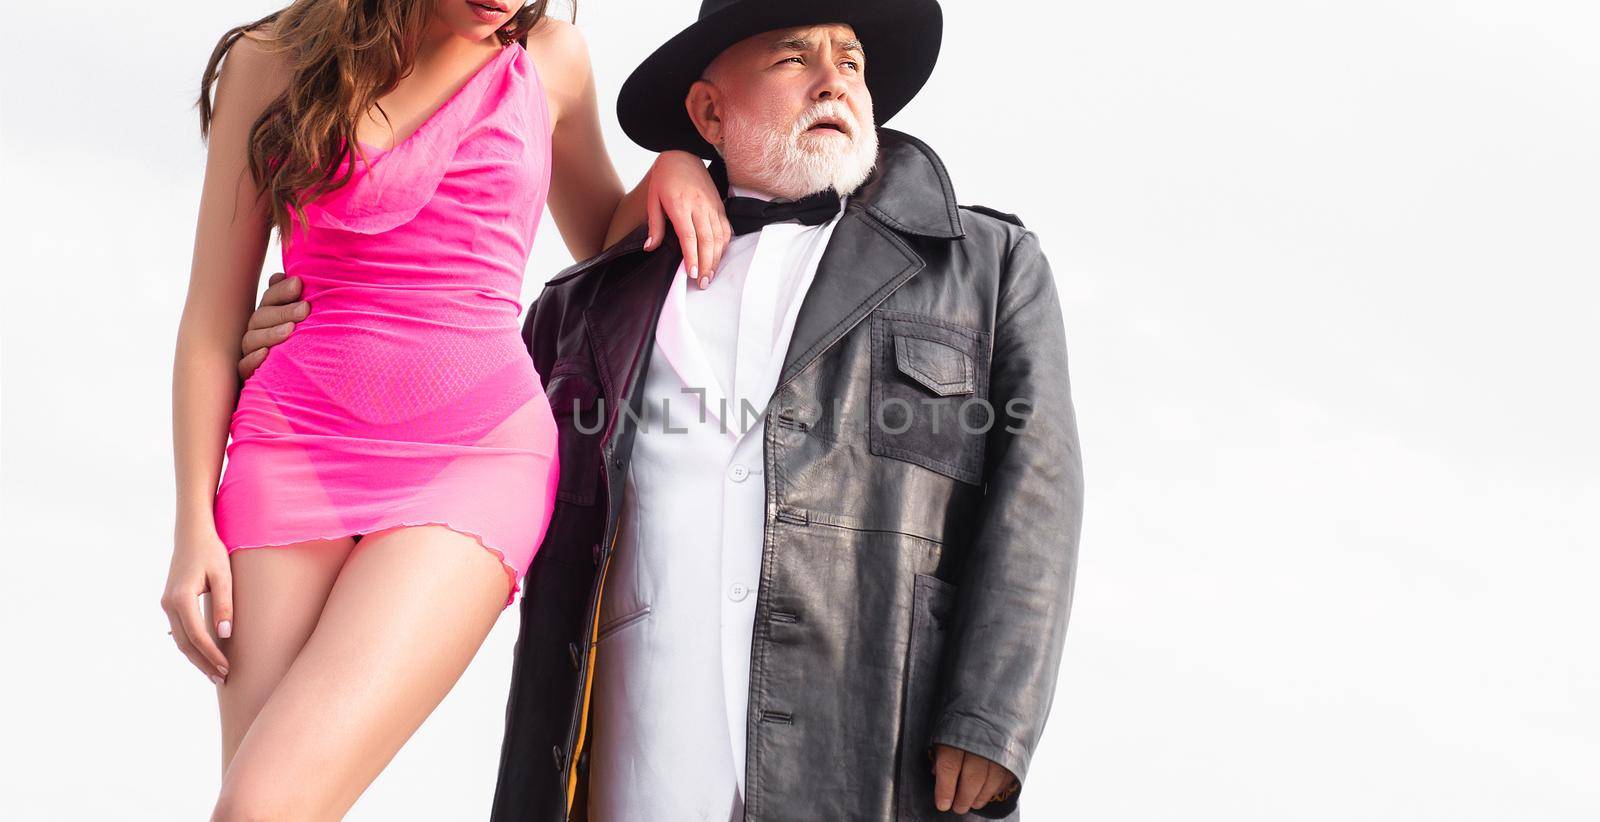 Senior old man and sexy young woman